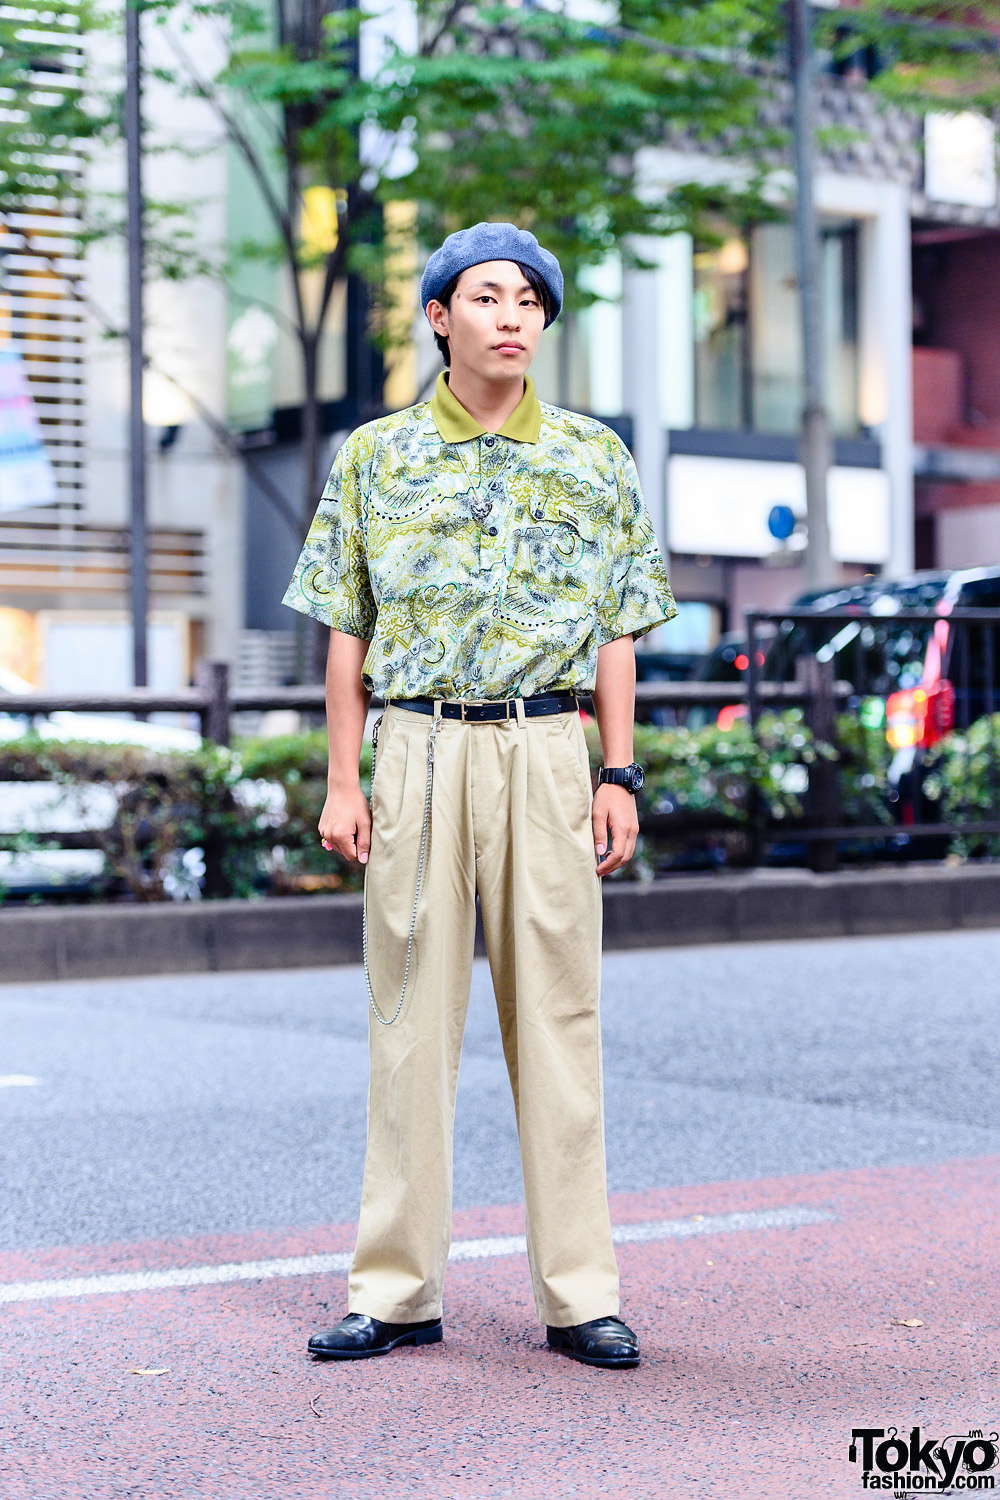 All Resale Harajuku Street Style w/ Blue Beret Hat, Printed Polo Shirt, Pleated Khaki Pants, Leather Belt, Leather Shoes, Chain Accessory & Black Watch